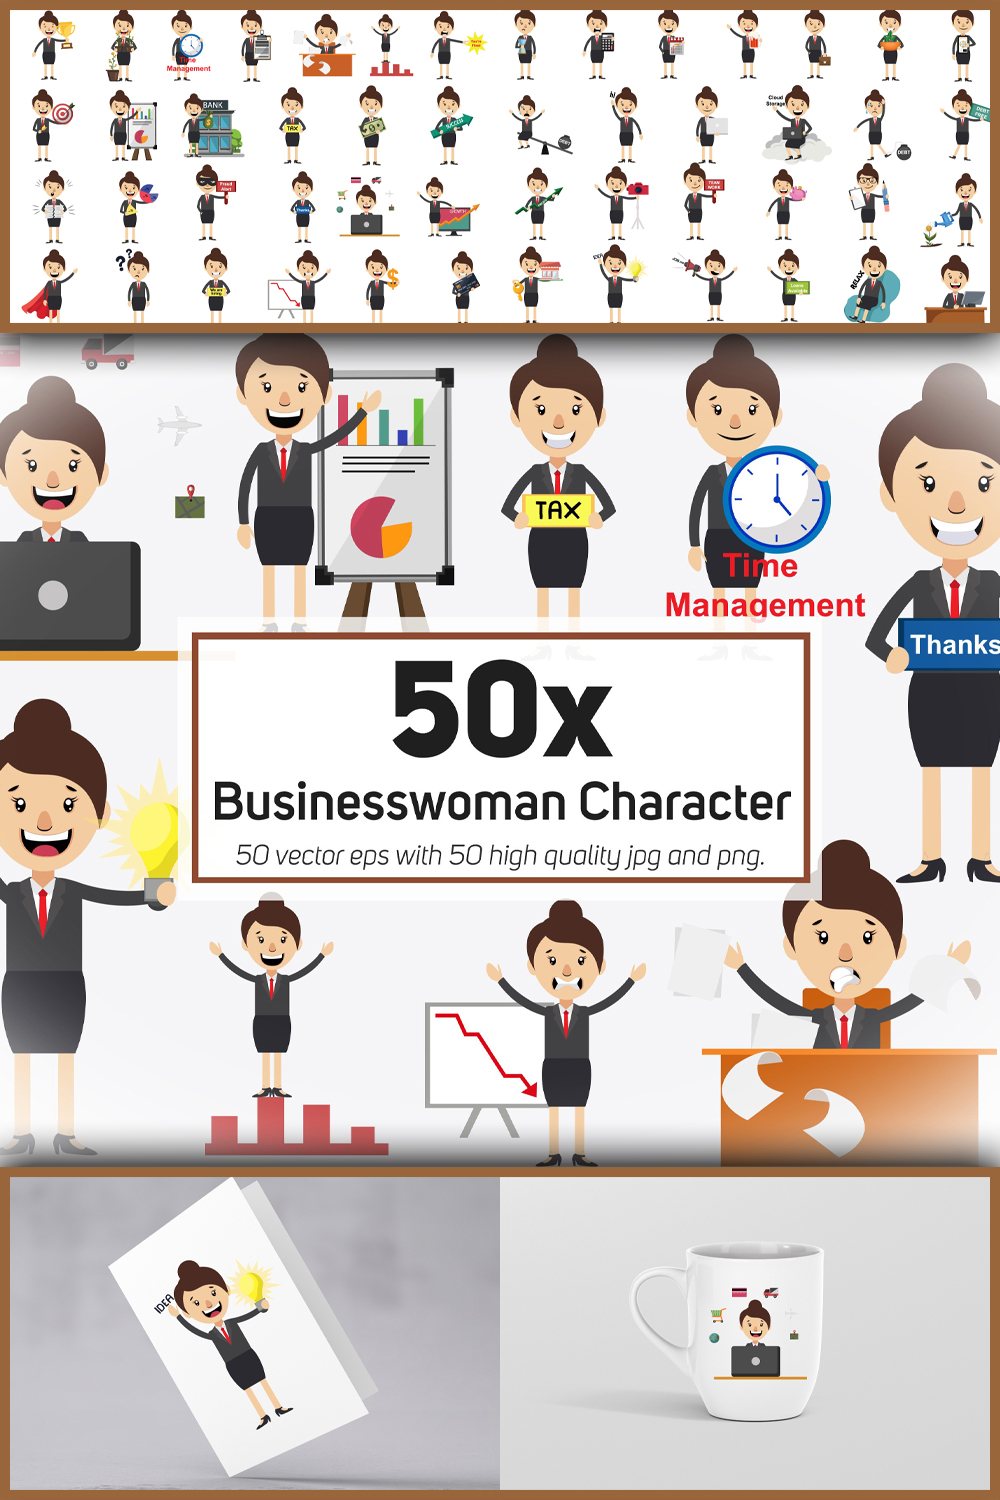 545398 50x businesswoman character and mascot collection pinterest 1000 1500 260